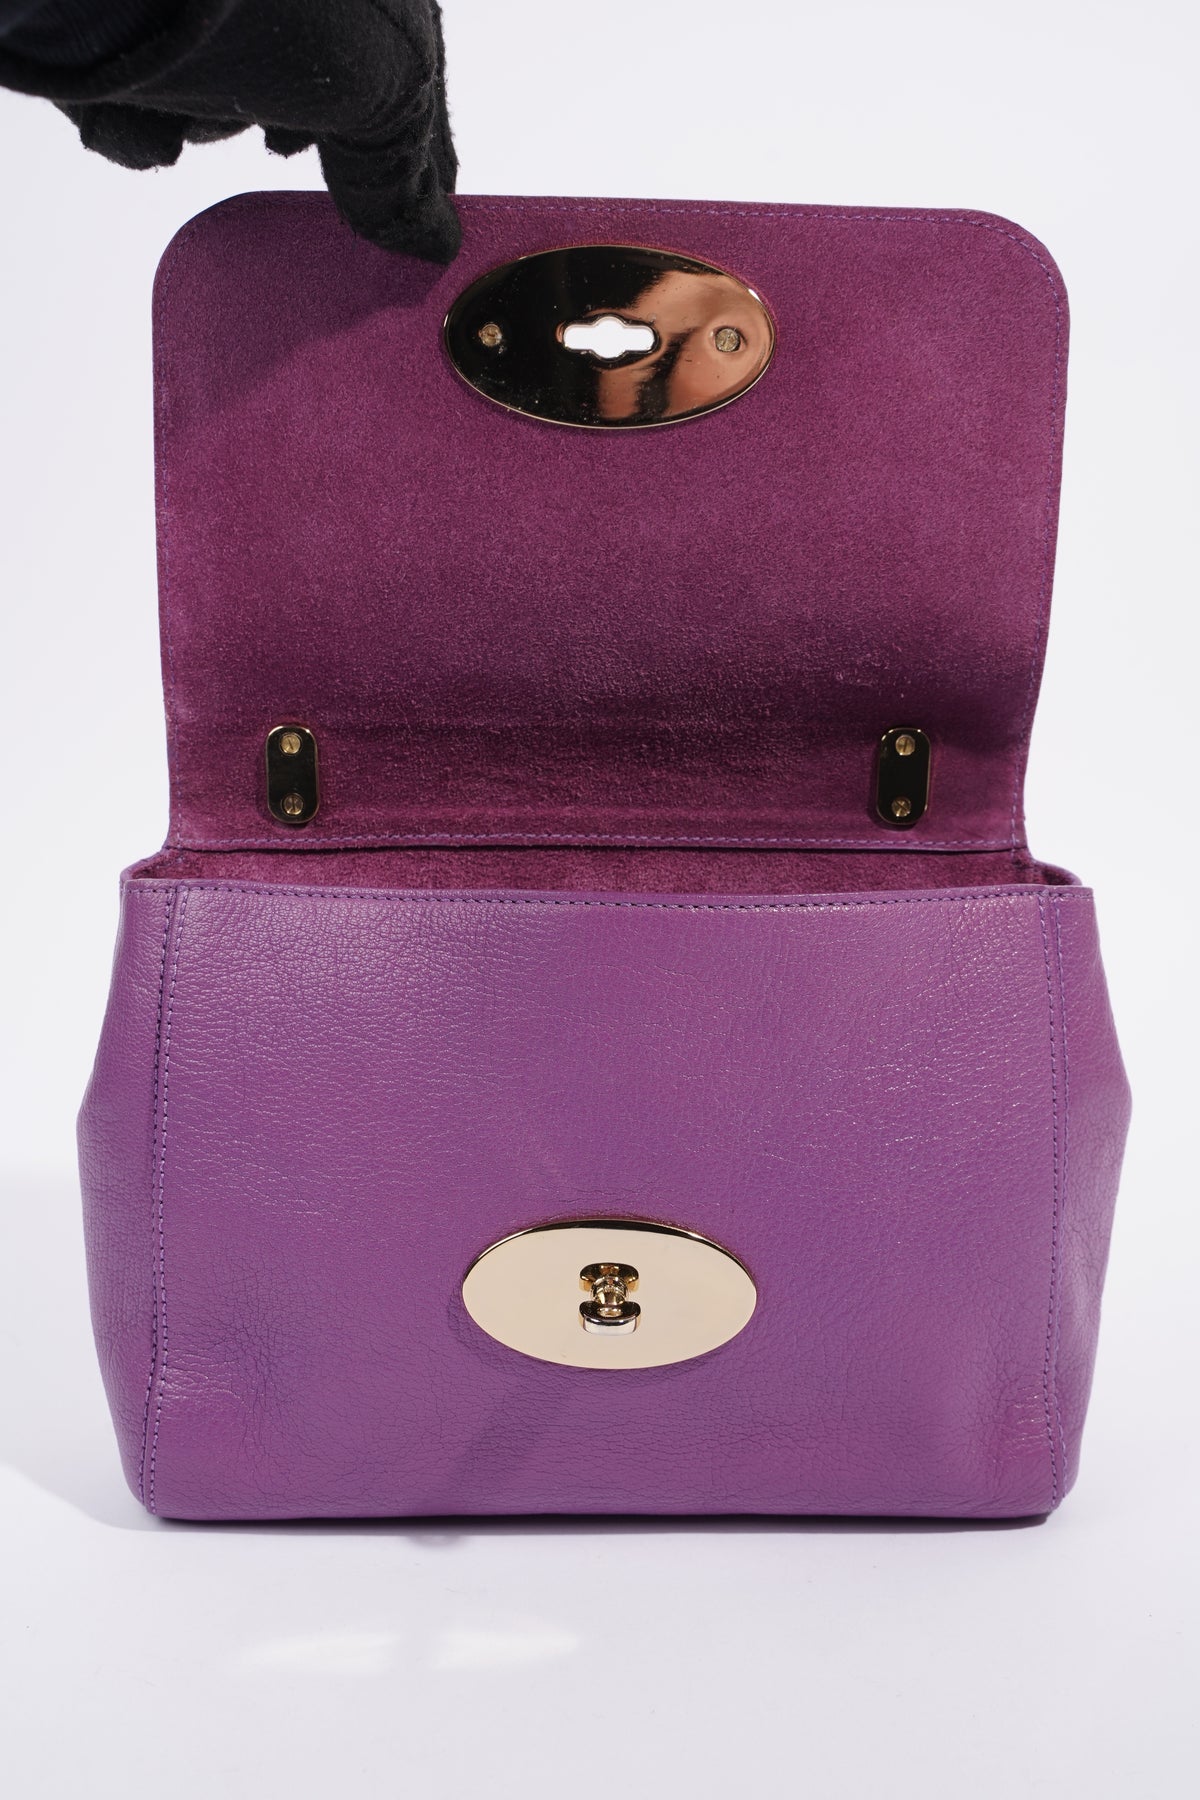 Amazon.com: Purse Organizer for Mulberry Lily Bag Organizer, Mulberry Lily  Top Handle Insert, Small Lily Insert, Handmade 2mm Thick Premium Felt Snug  Sturdy Gold Zipper (For Medium Lily, Violet) : Handmade Products